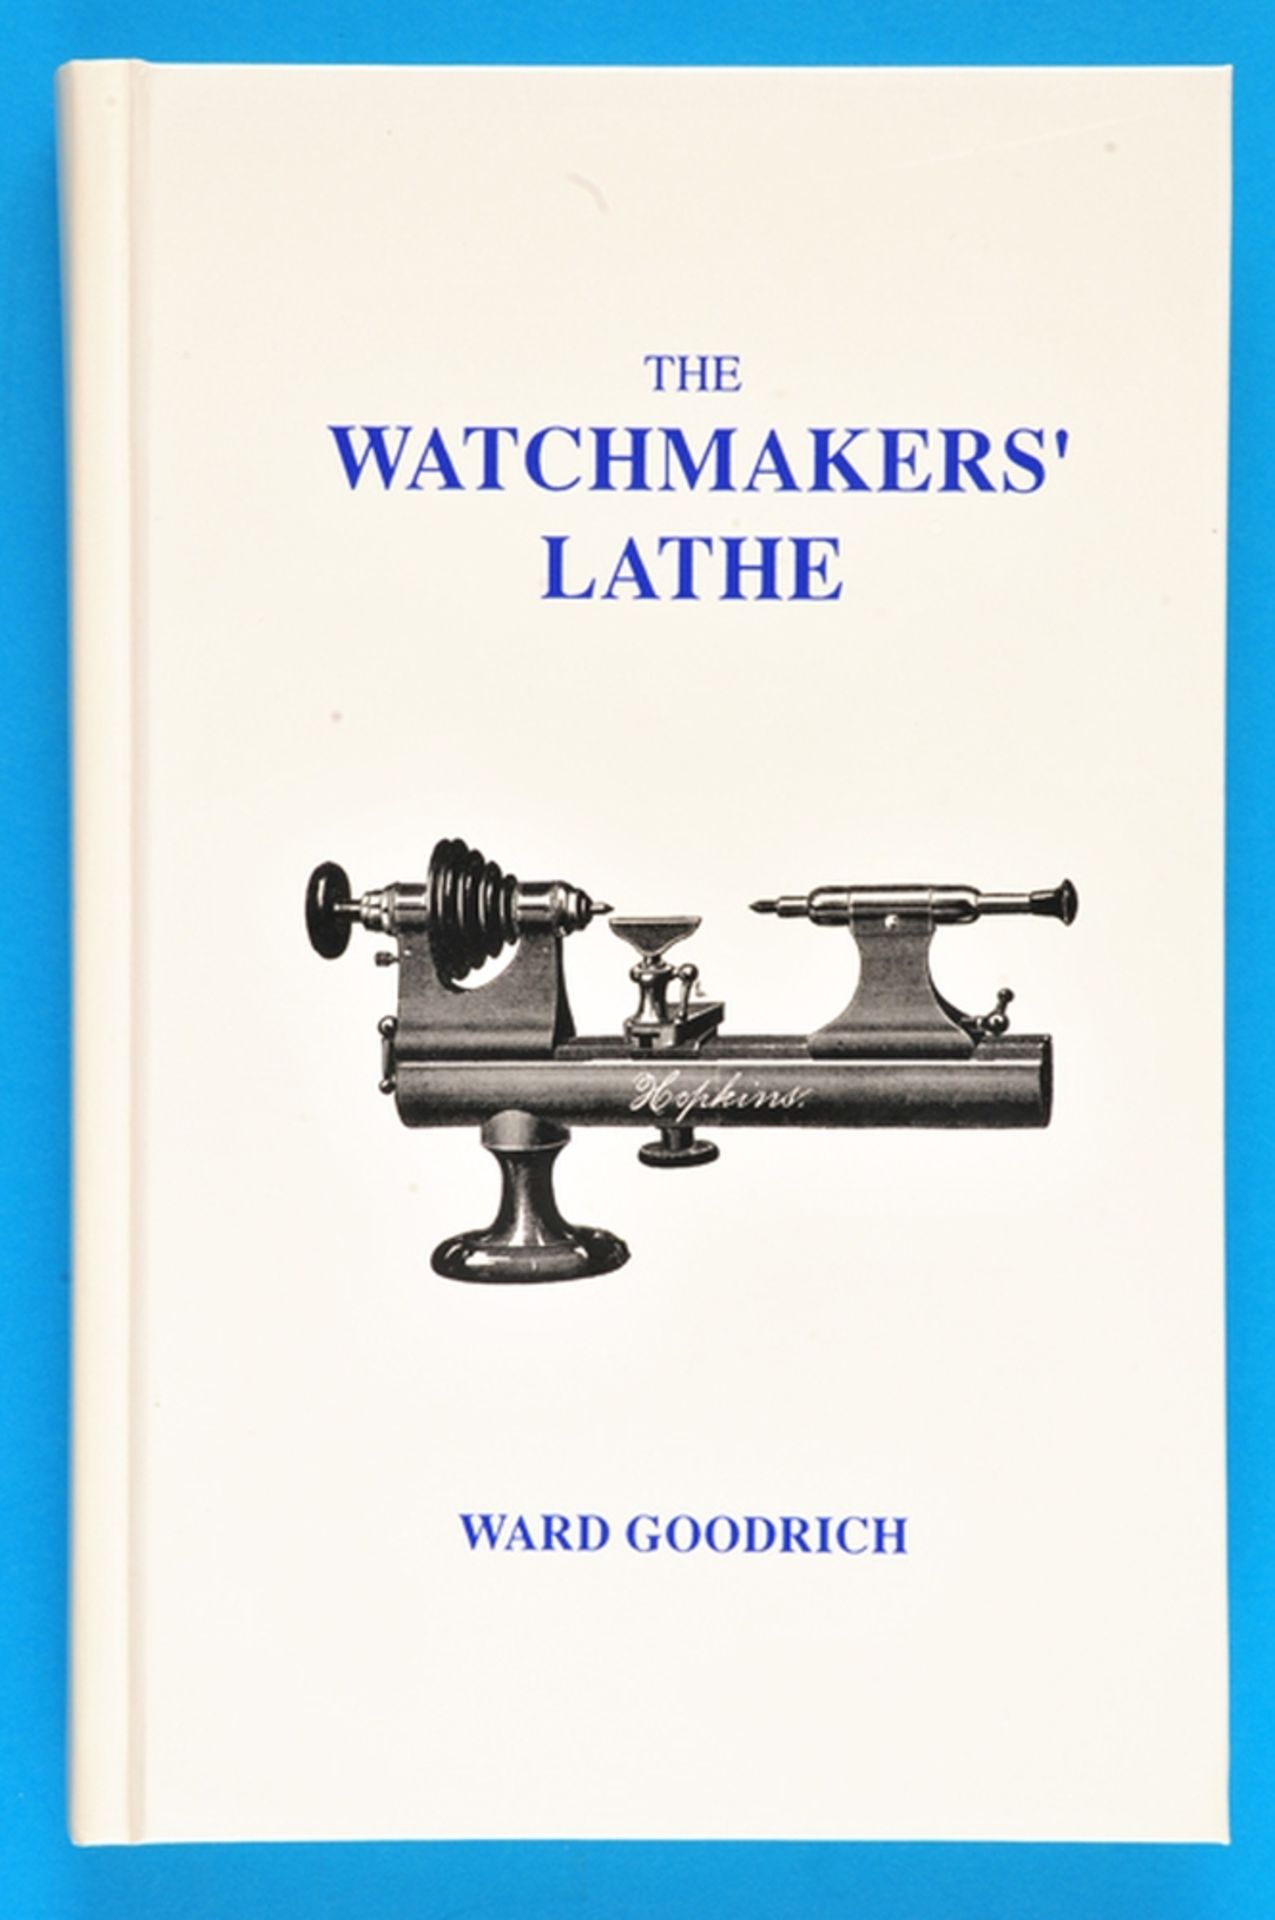 Ward Goodrich, The Watchmakers‘ Lathe